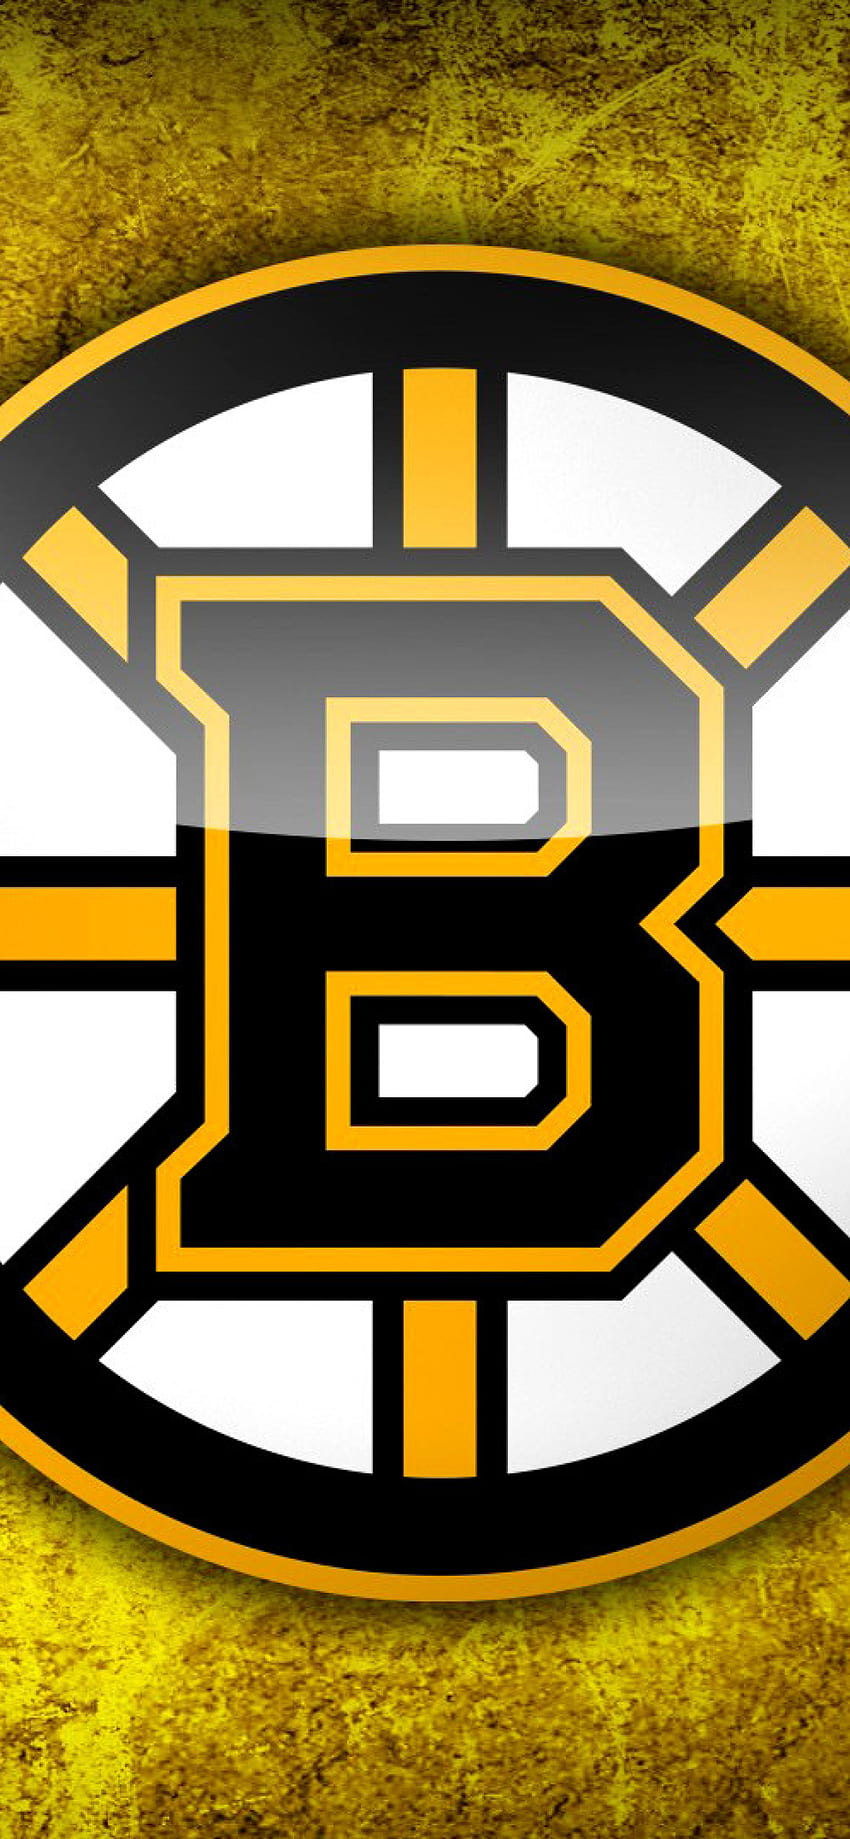 Boston Bruins wallpaper by buzzcon  Download on ZEDGE  17ad